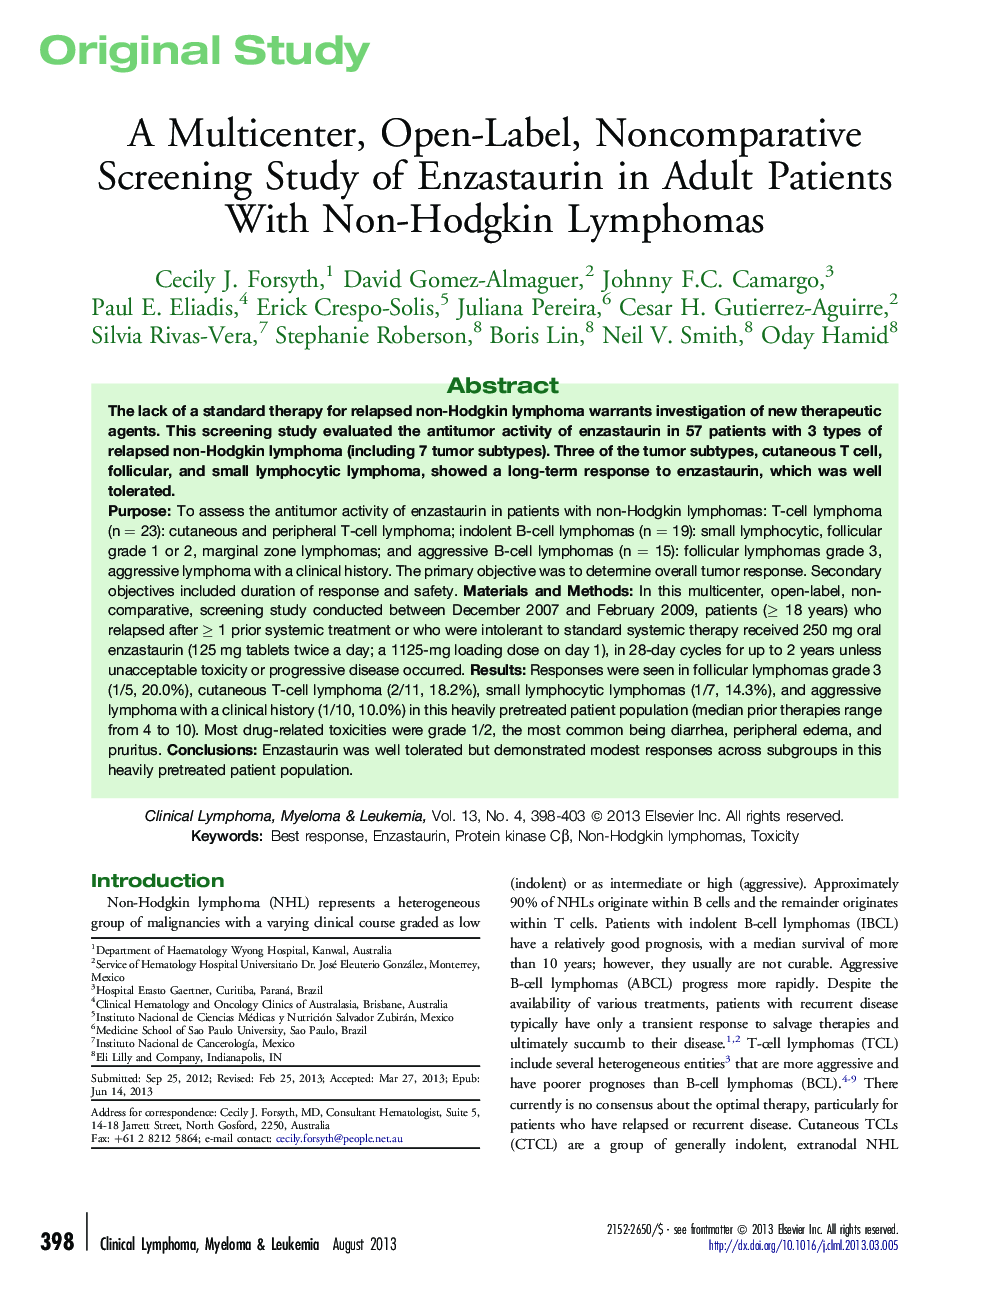 A Multicenter, Open-Label, Noncomparative Screening Study of Enzastaurin in Adult Patients With Non-Hodgkin Lymphomas